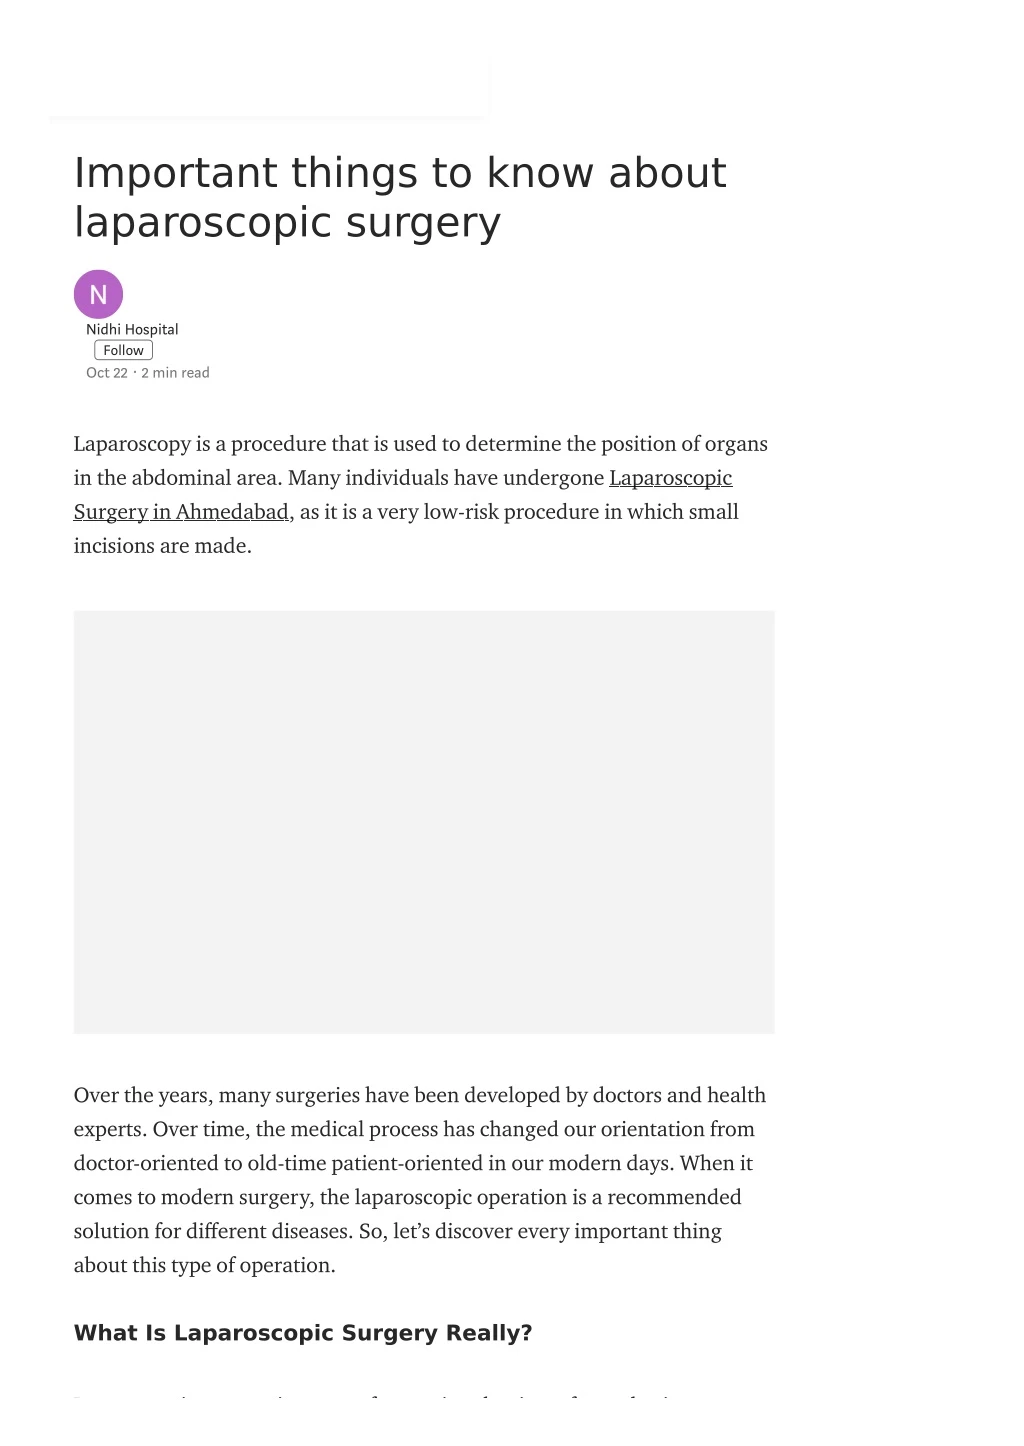 important things to know about laparoscopic